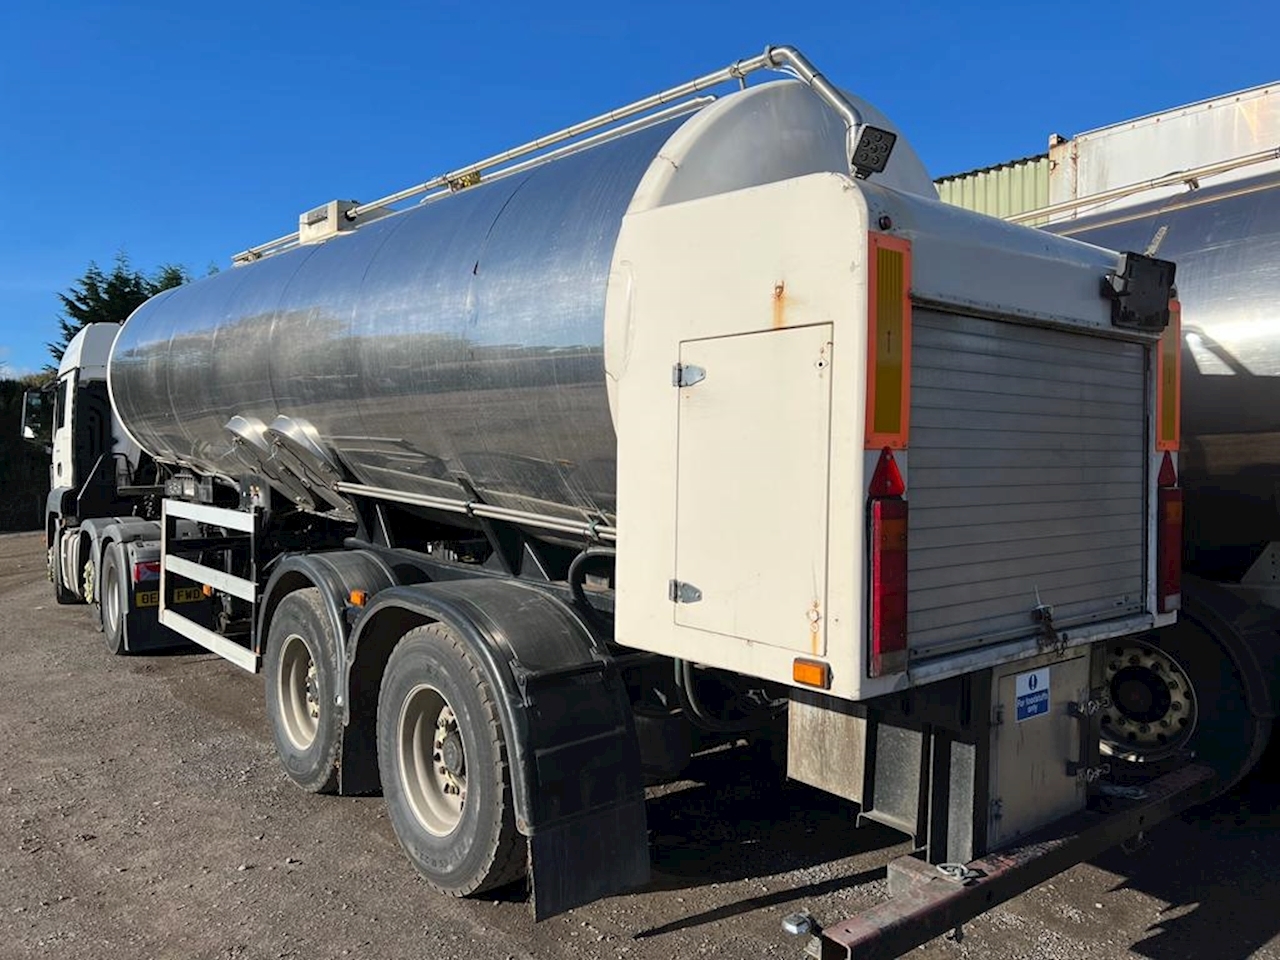 TGS 25 440 with Crossland Stainless Tanker